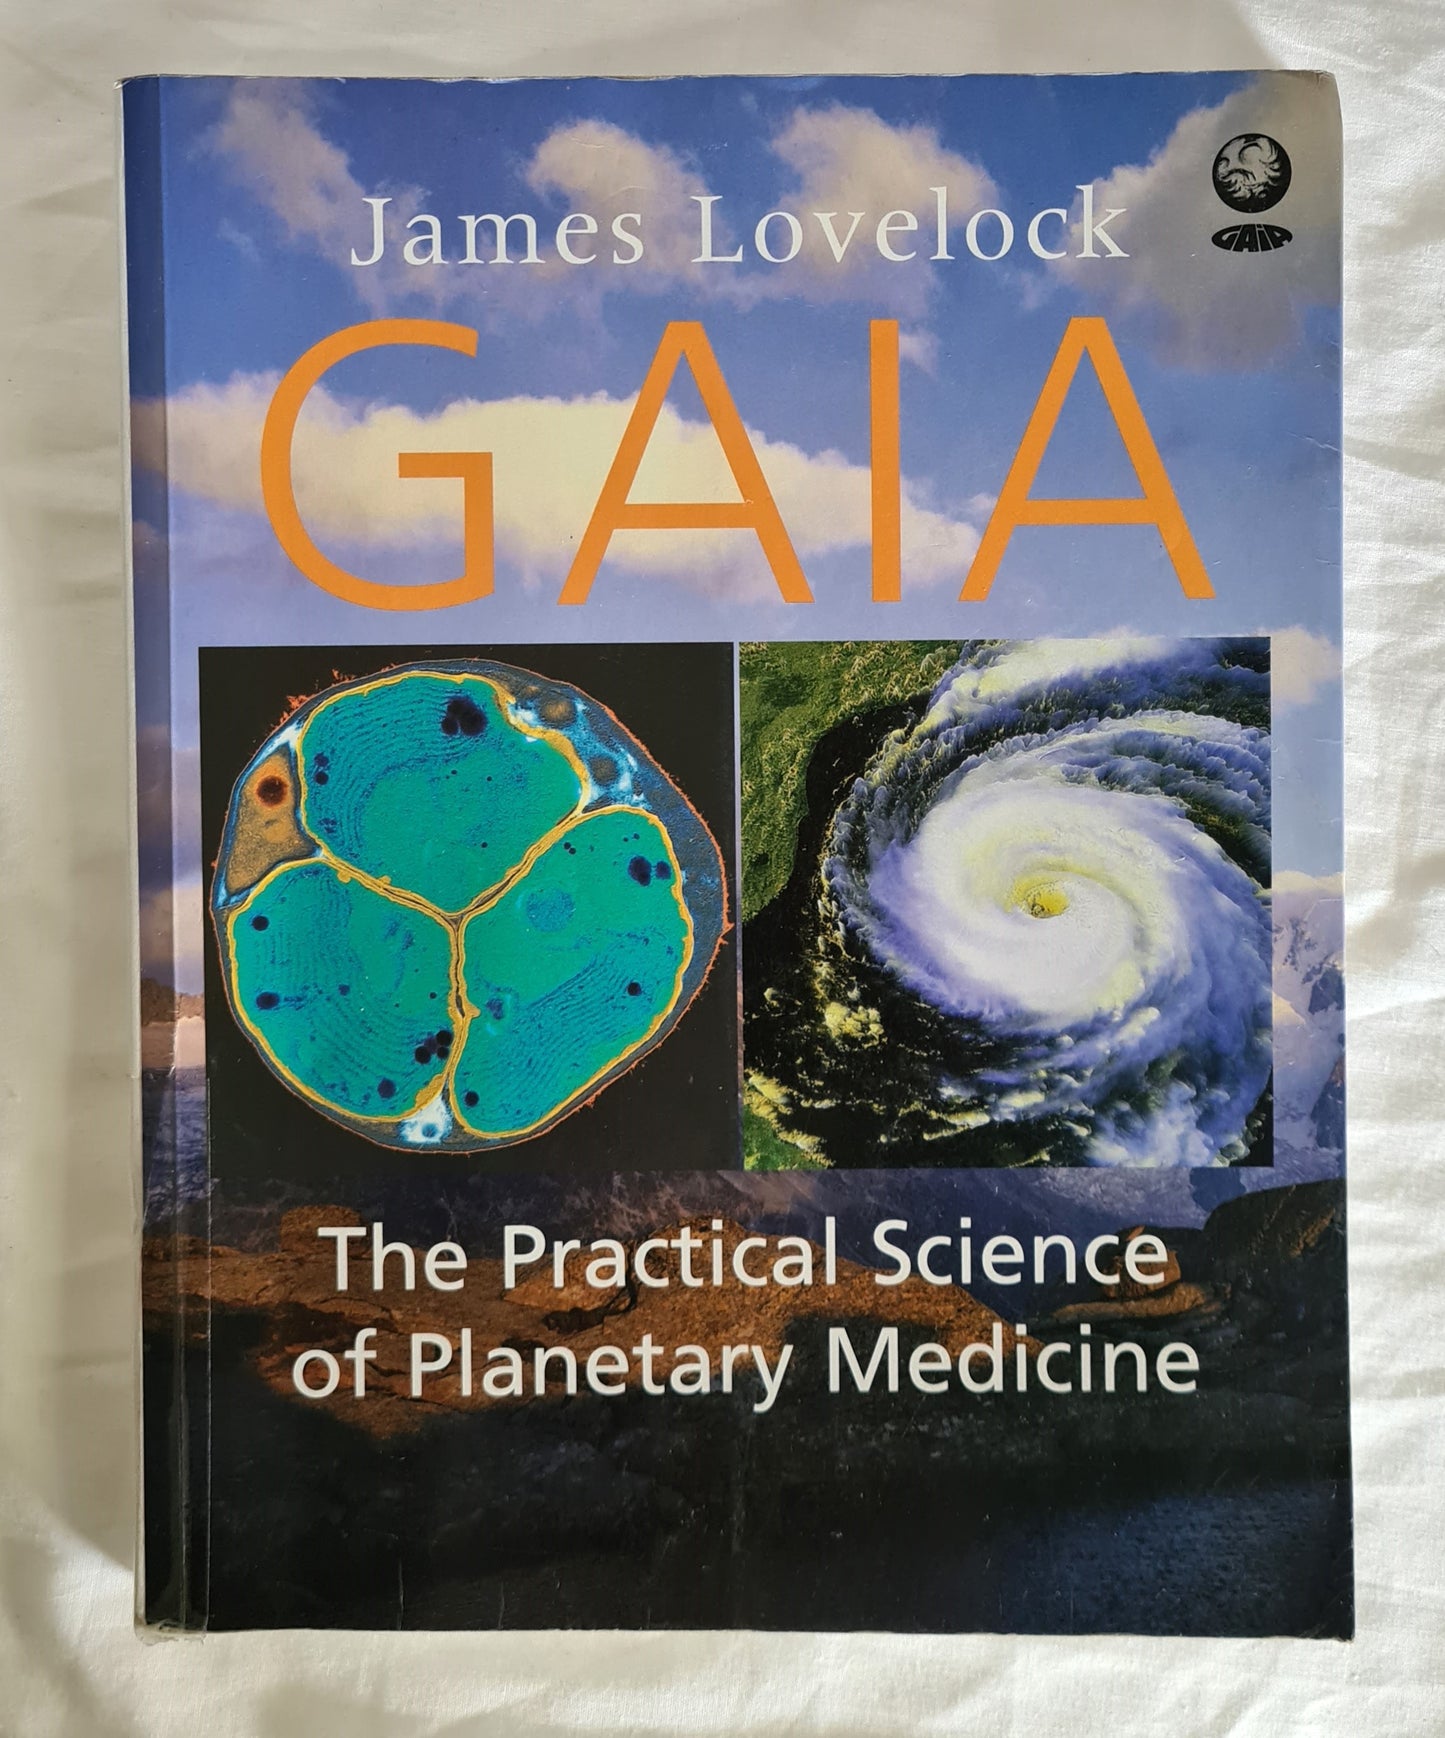 Gaia  The practical Science of Planetary Medicine  by James Lovelock